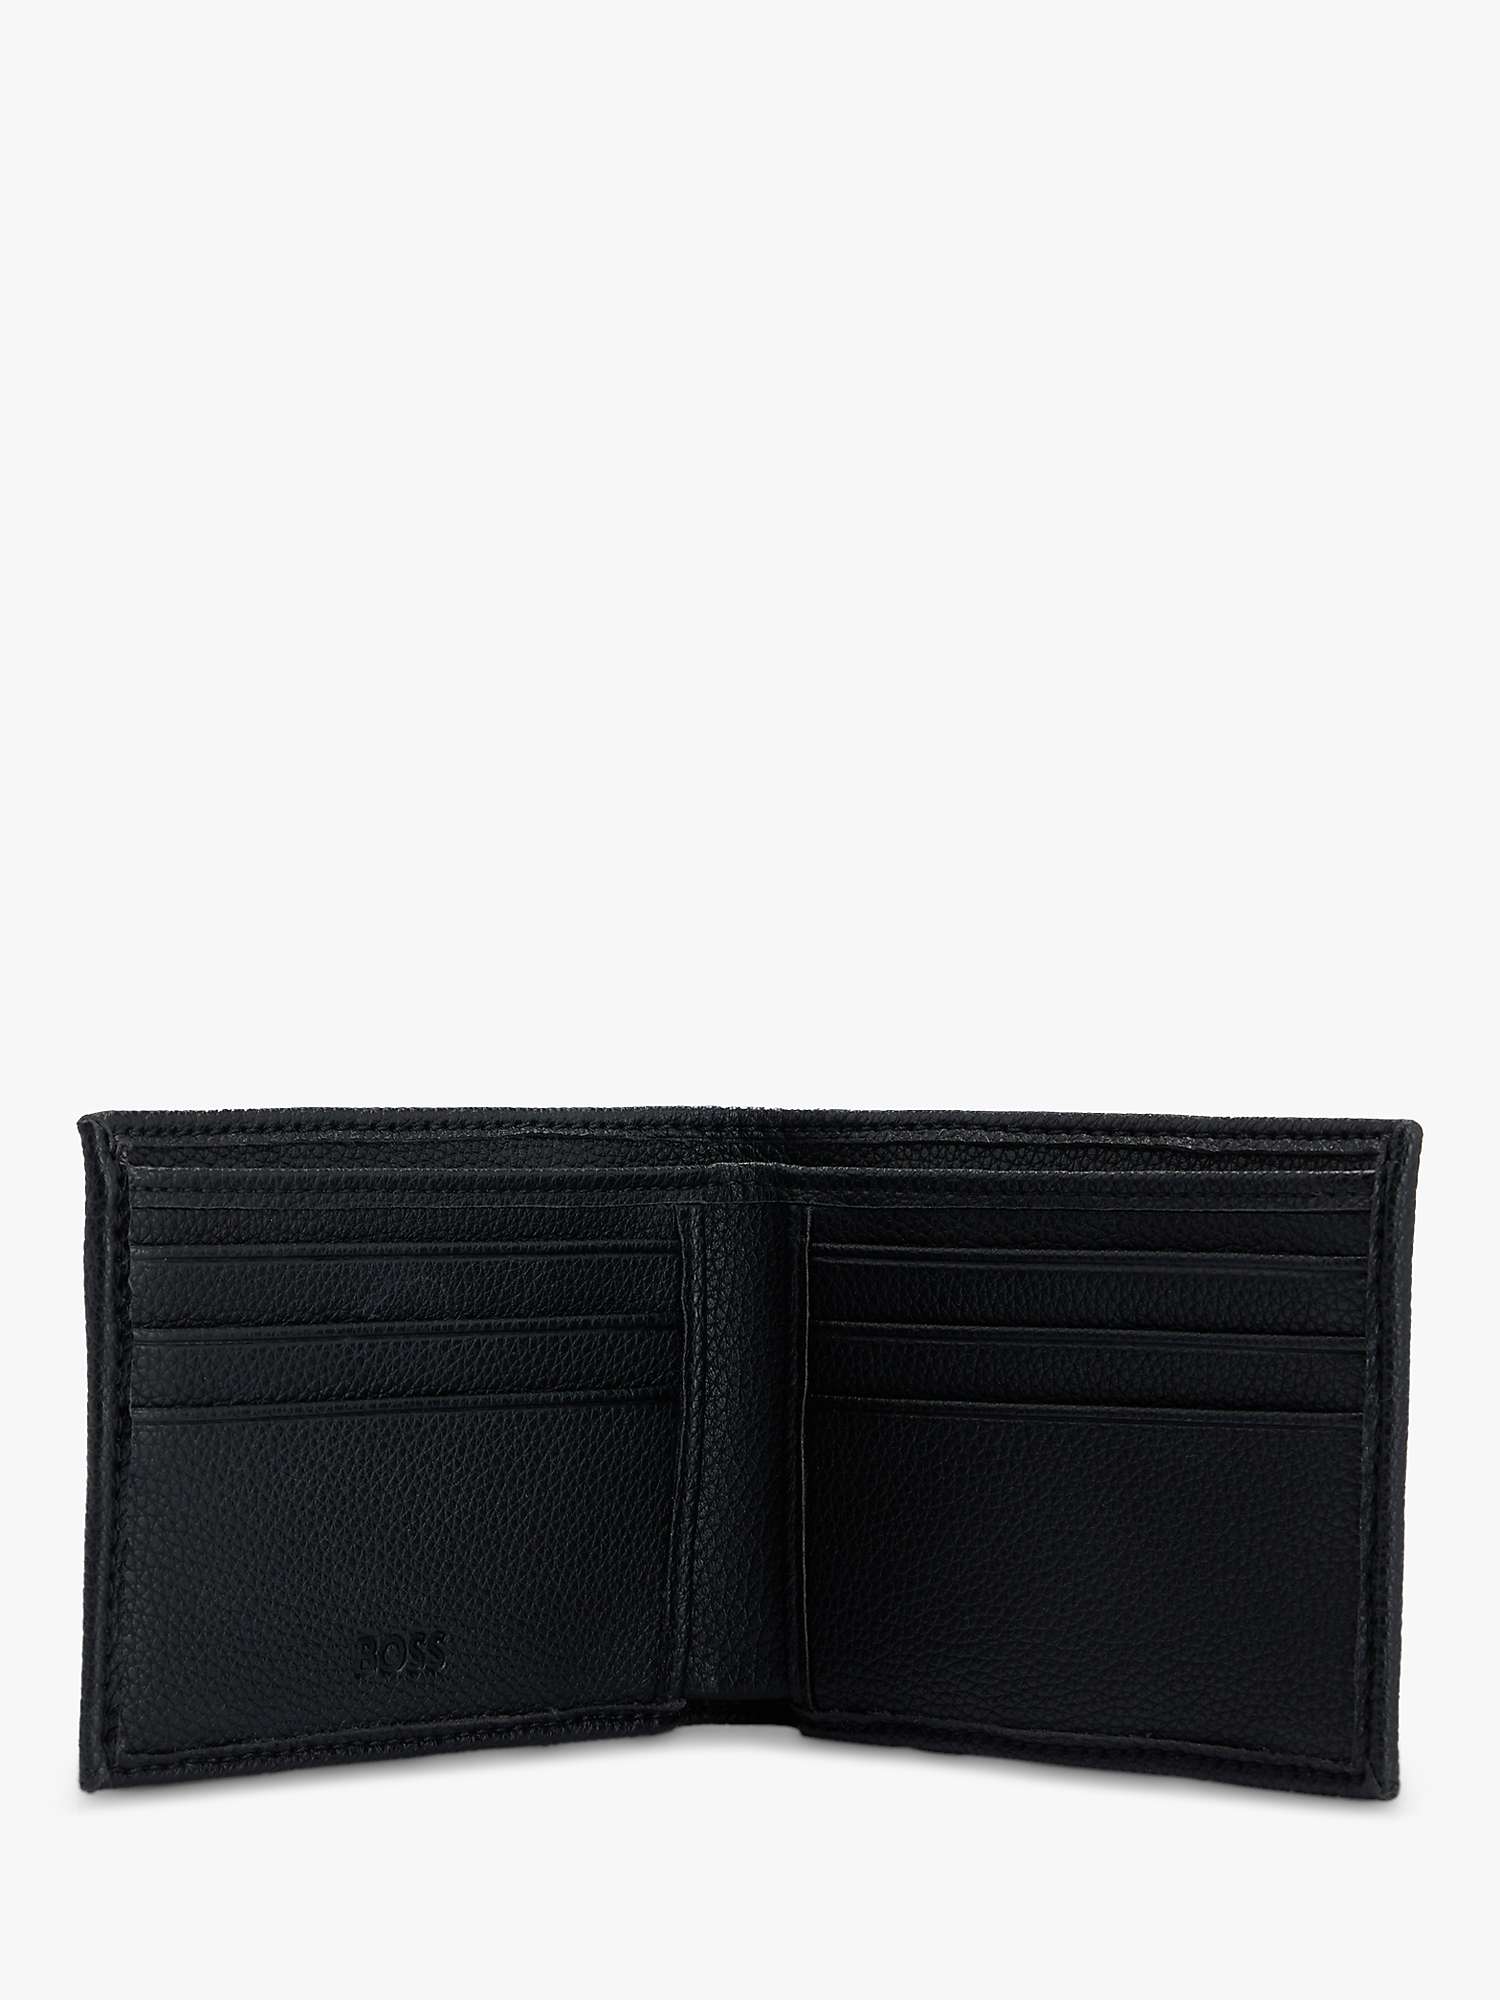 Buy BOSS Ray Small Faux Leather Billfold Wallet, Black Online at johnlewis.com